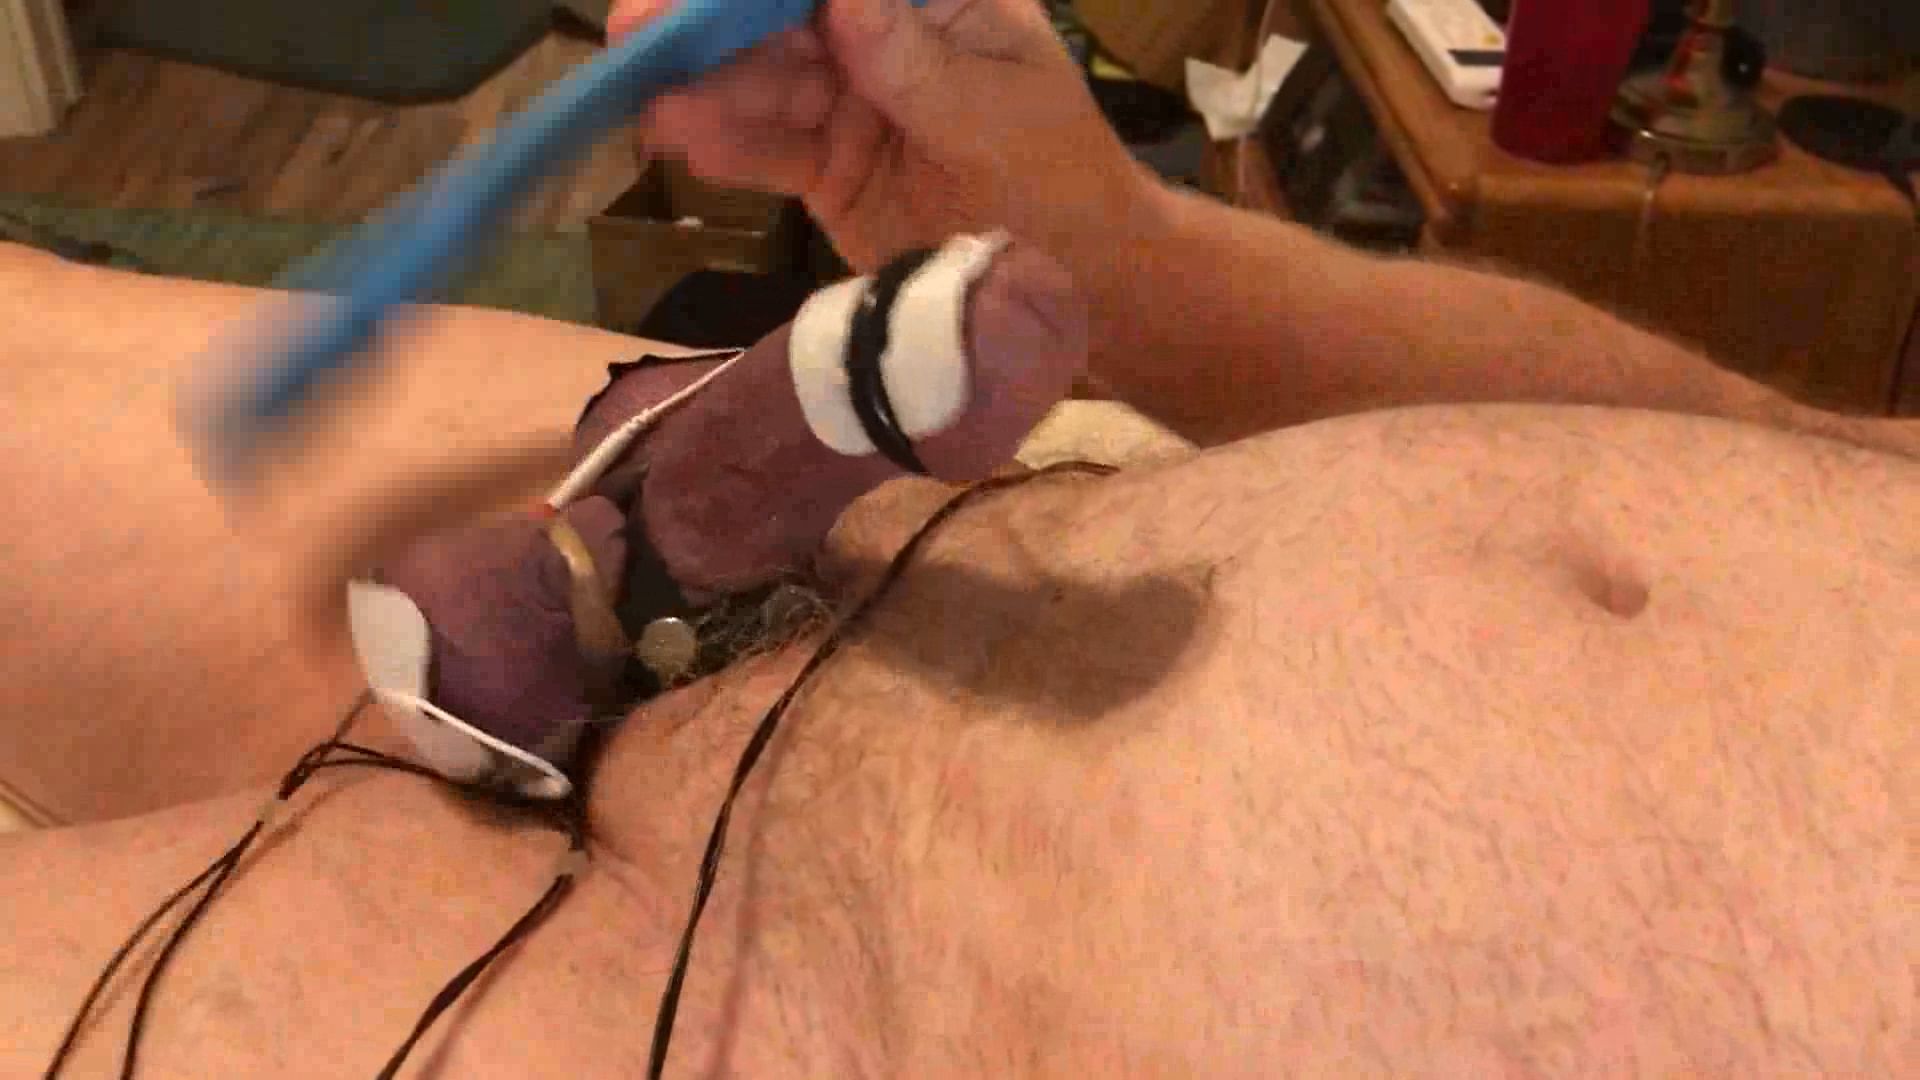 Cock twitches with estim pulse and precum flows as I slap an #31